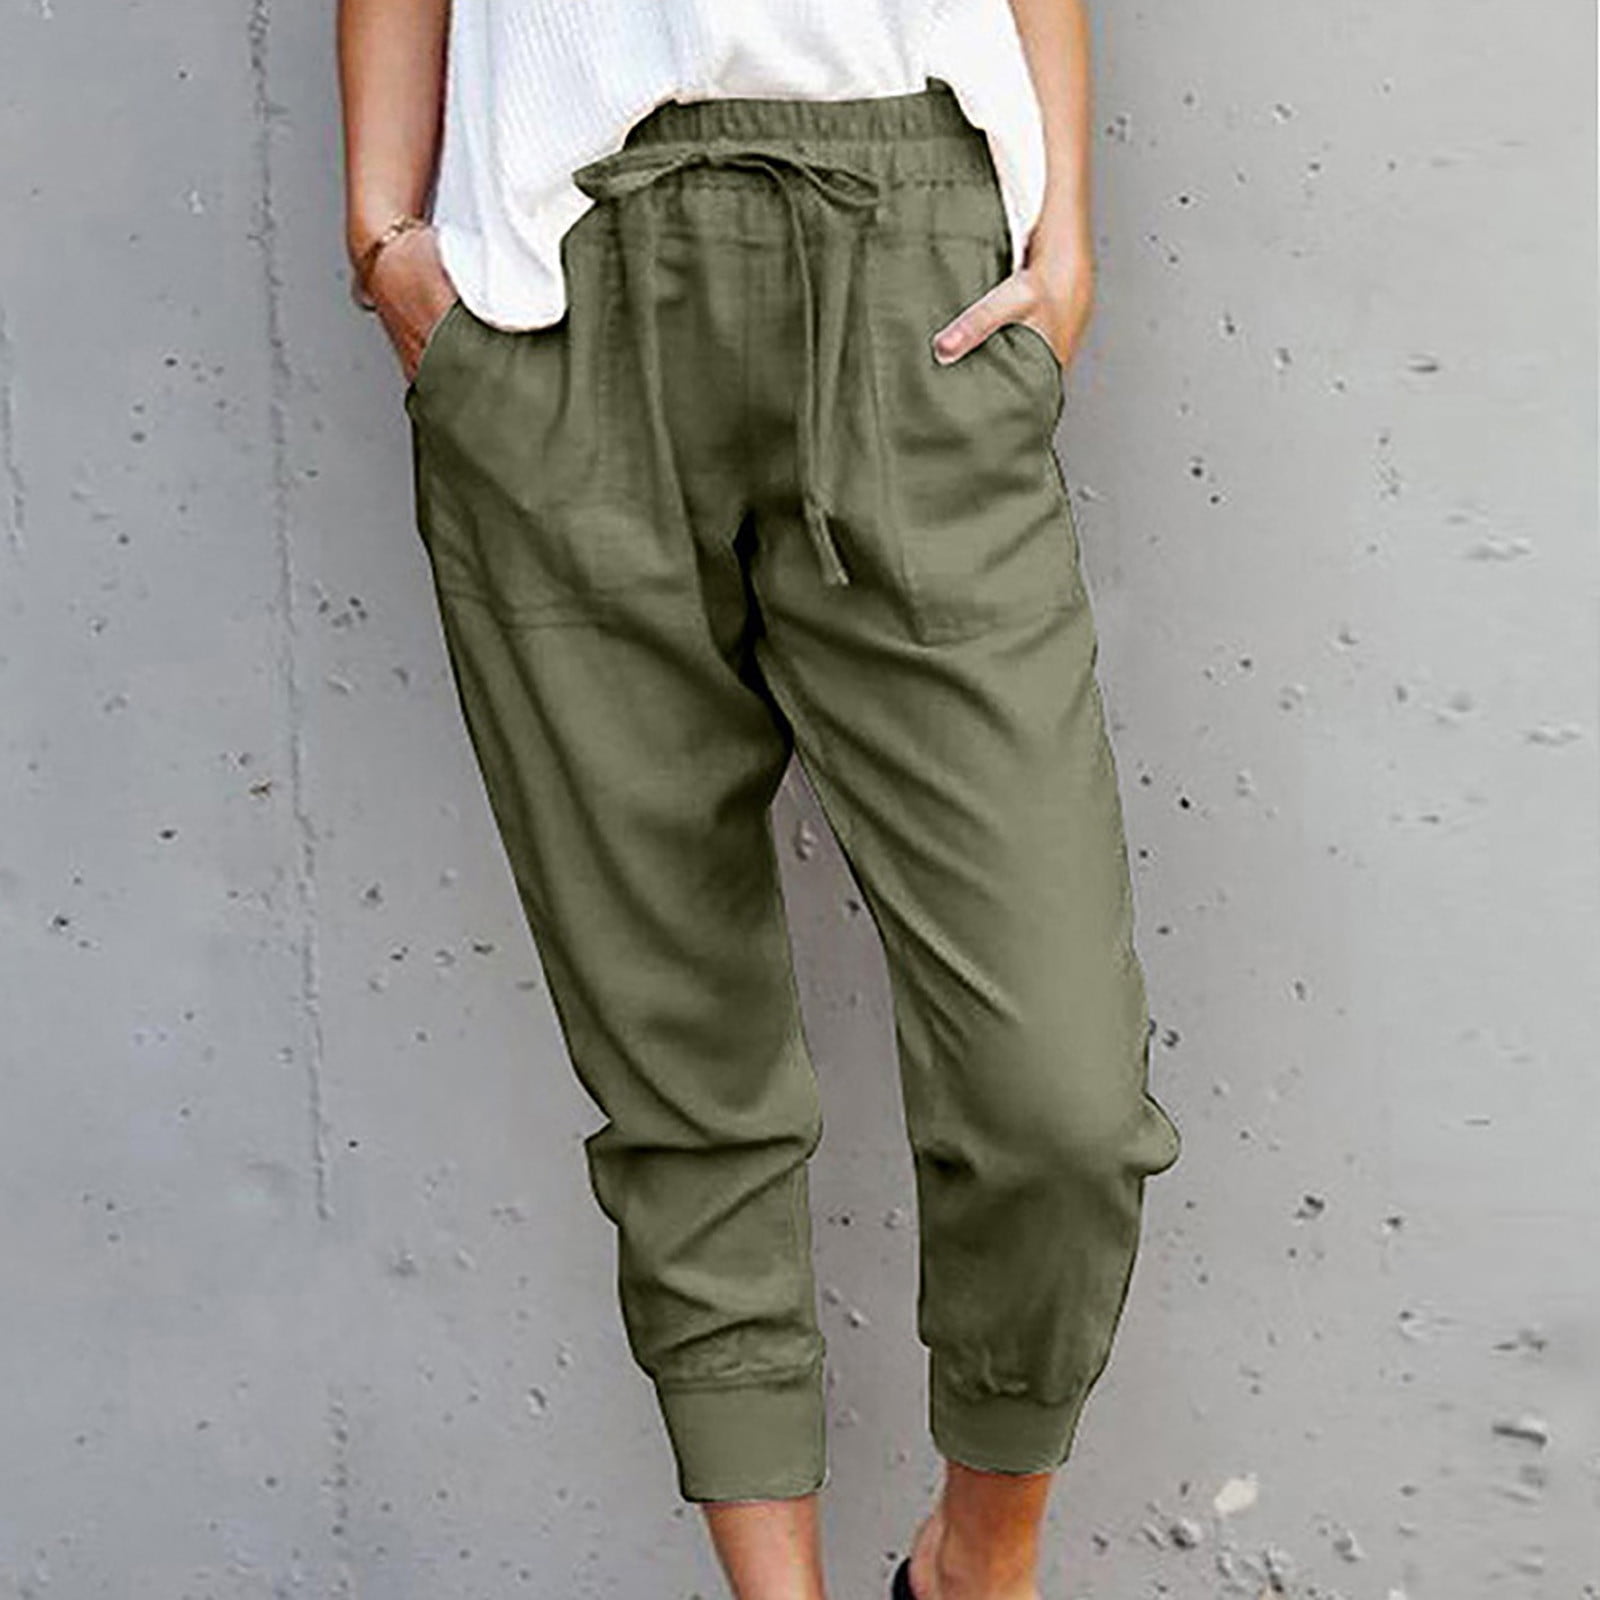 Zpanxa Women's Wide Leg Pants Casual Solid Cotton Linen Pants, Drawstring  Elastic Waist Calf-Length Pencil Pants, Work Pants for Women, Sports  Athletic Lounge Pants with Pockets Army Green A XXL 